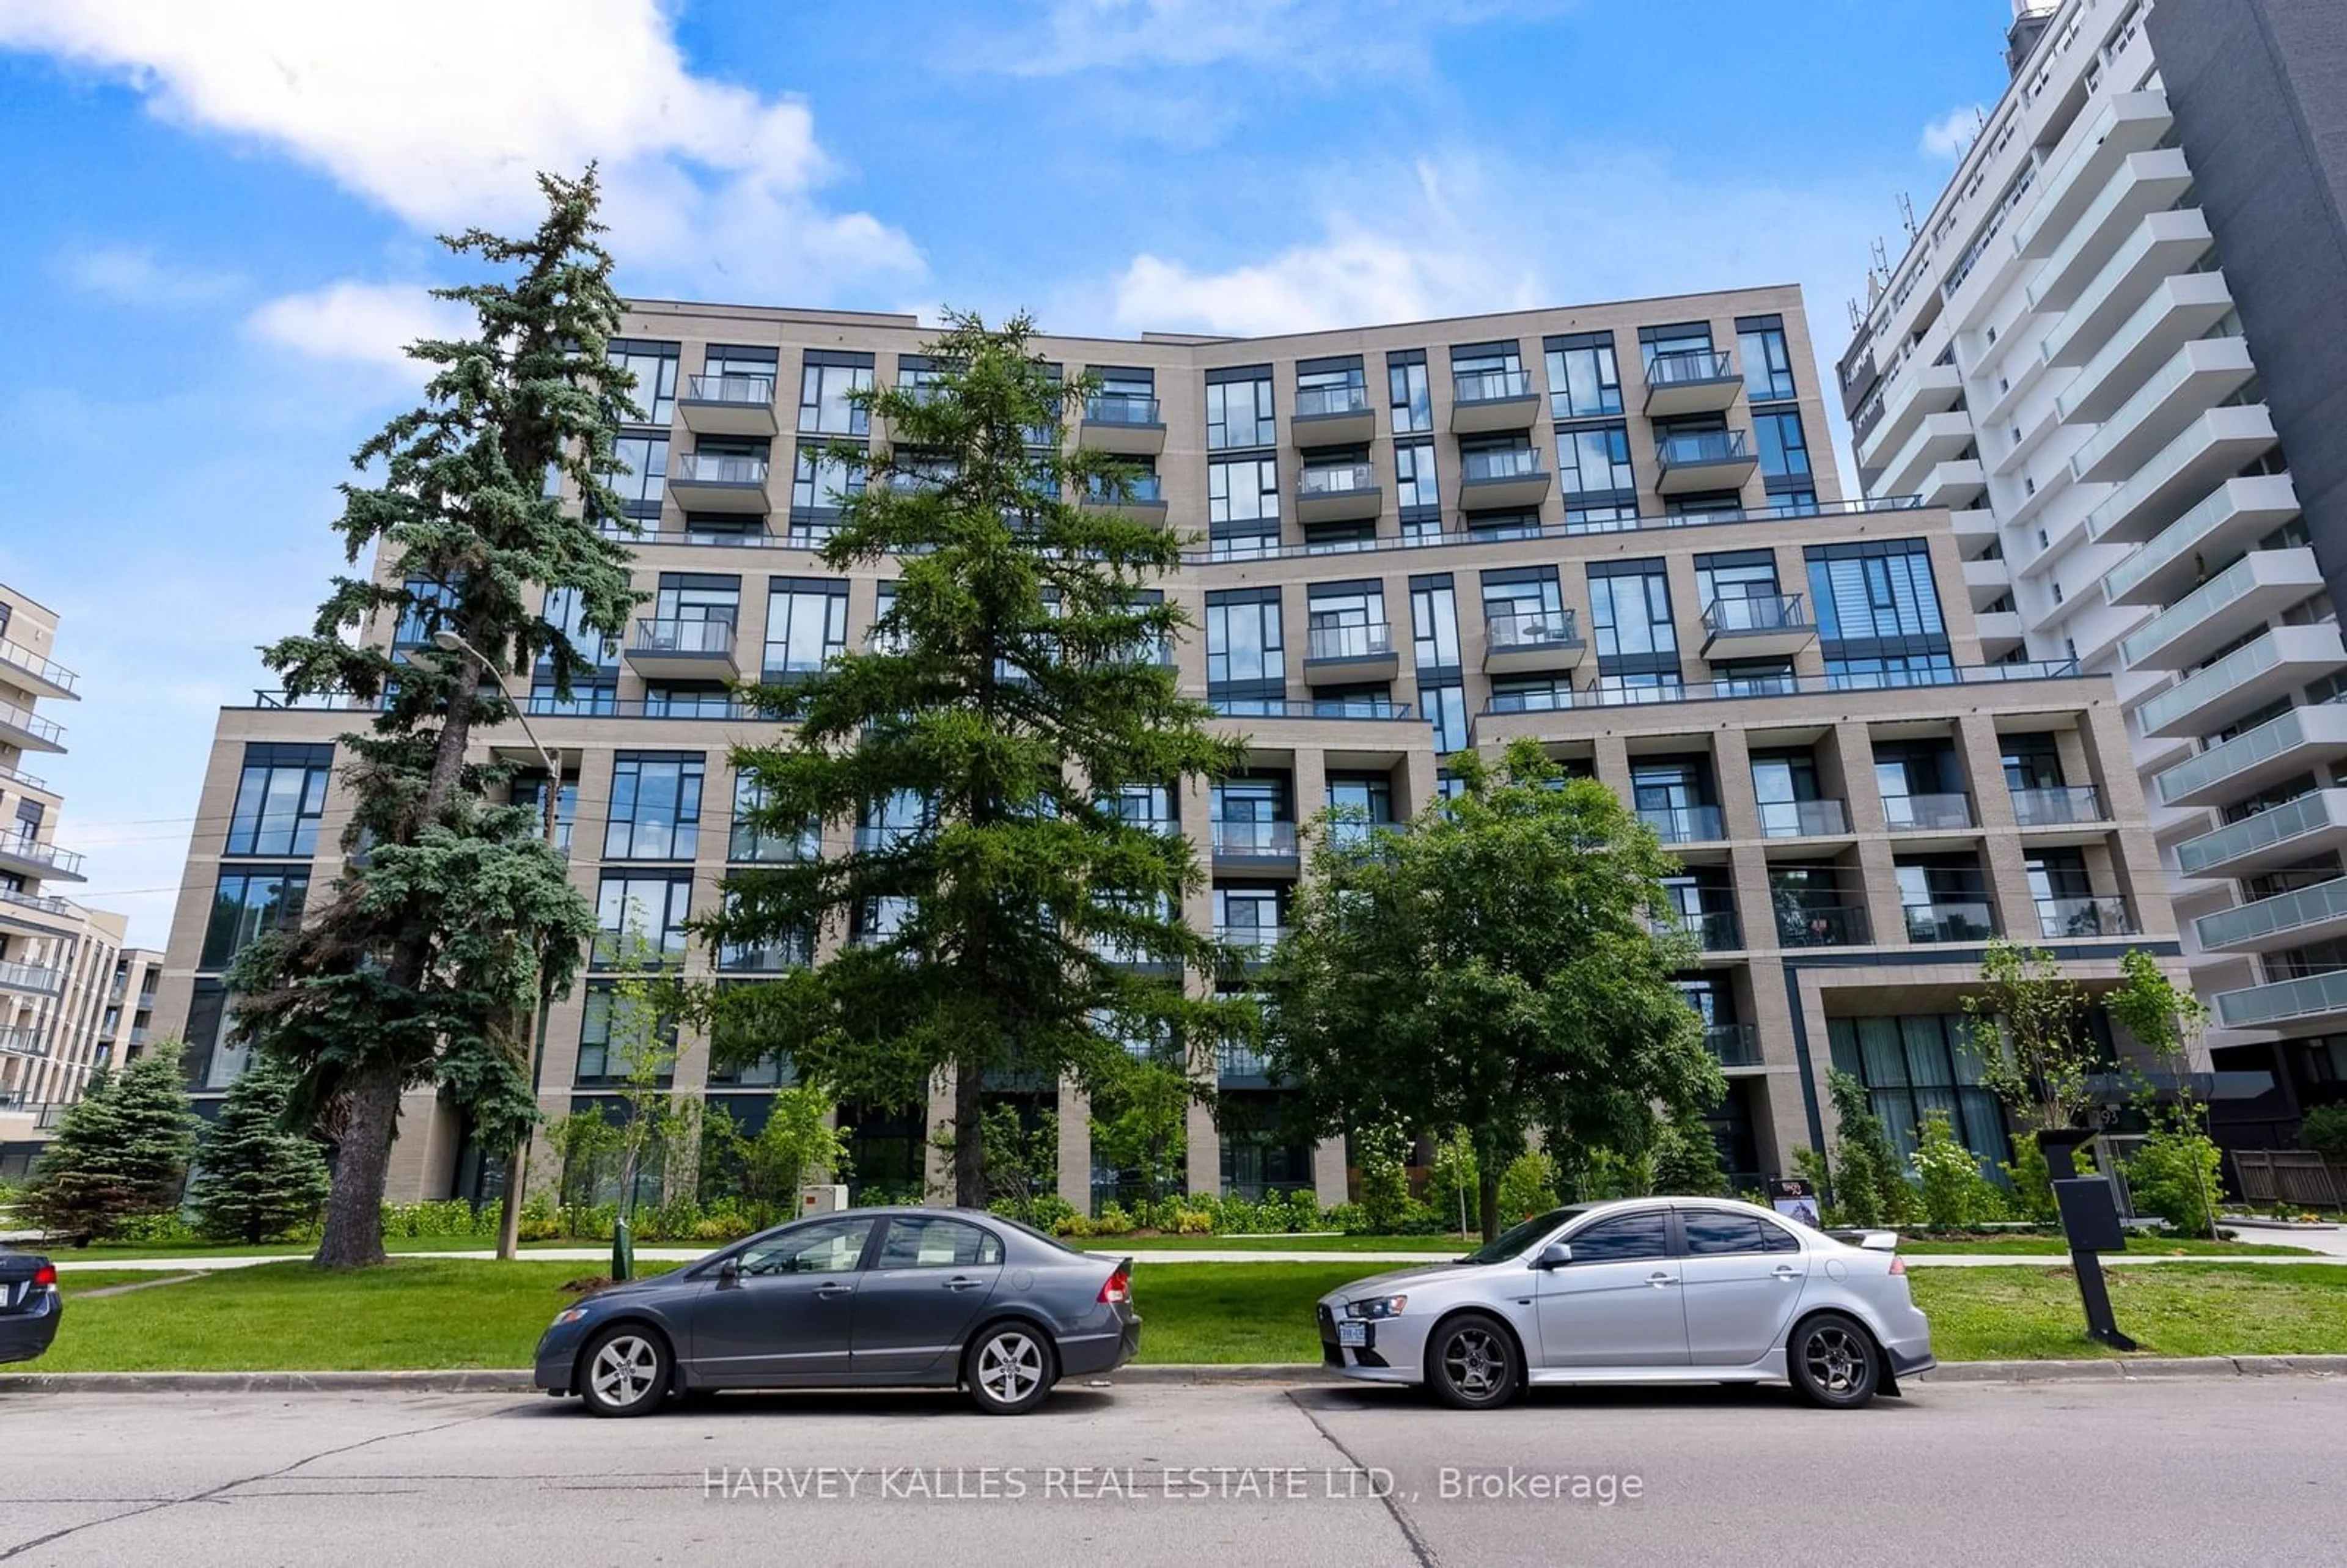 A pic from exterior of the house or condo for 293 The Kingsway #707, Toronto Ontario M9A 3A9